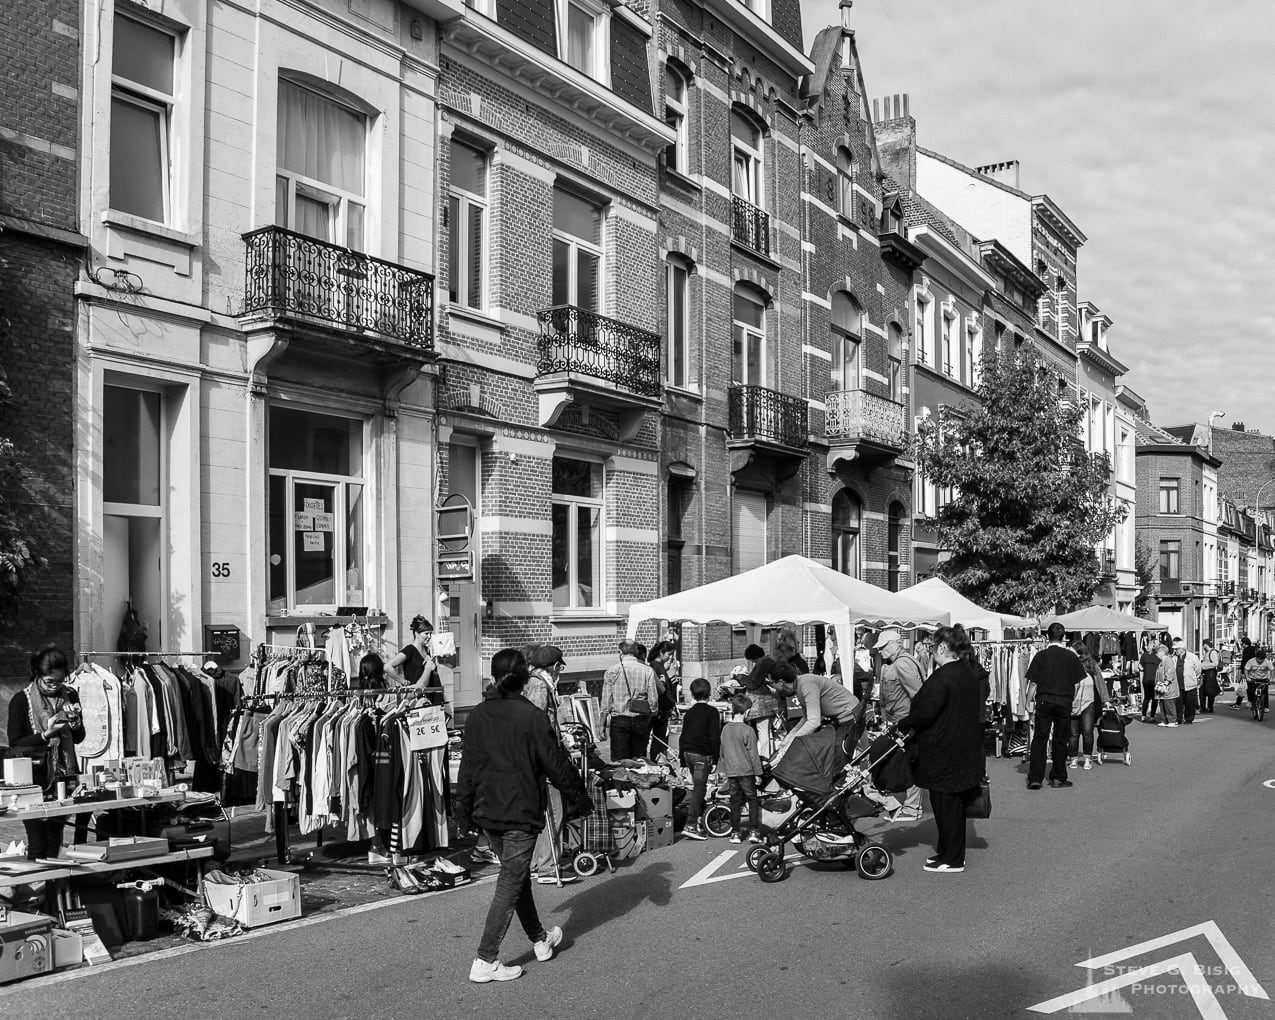 One of a series of black and white photographs from the 2018 Grande Braderie D'Ixelles sidewalk sale and street festival in Brussels, Belgium.